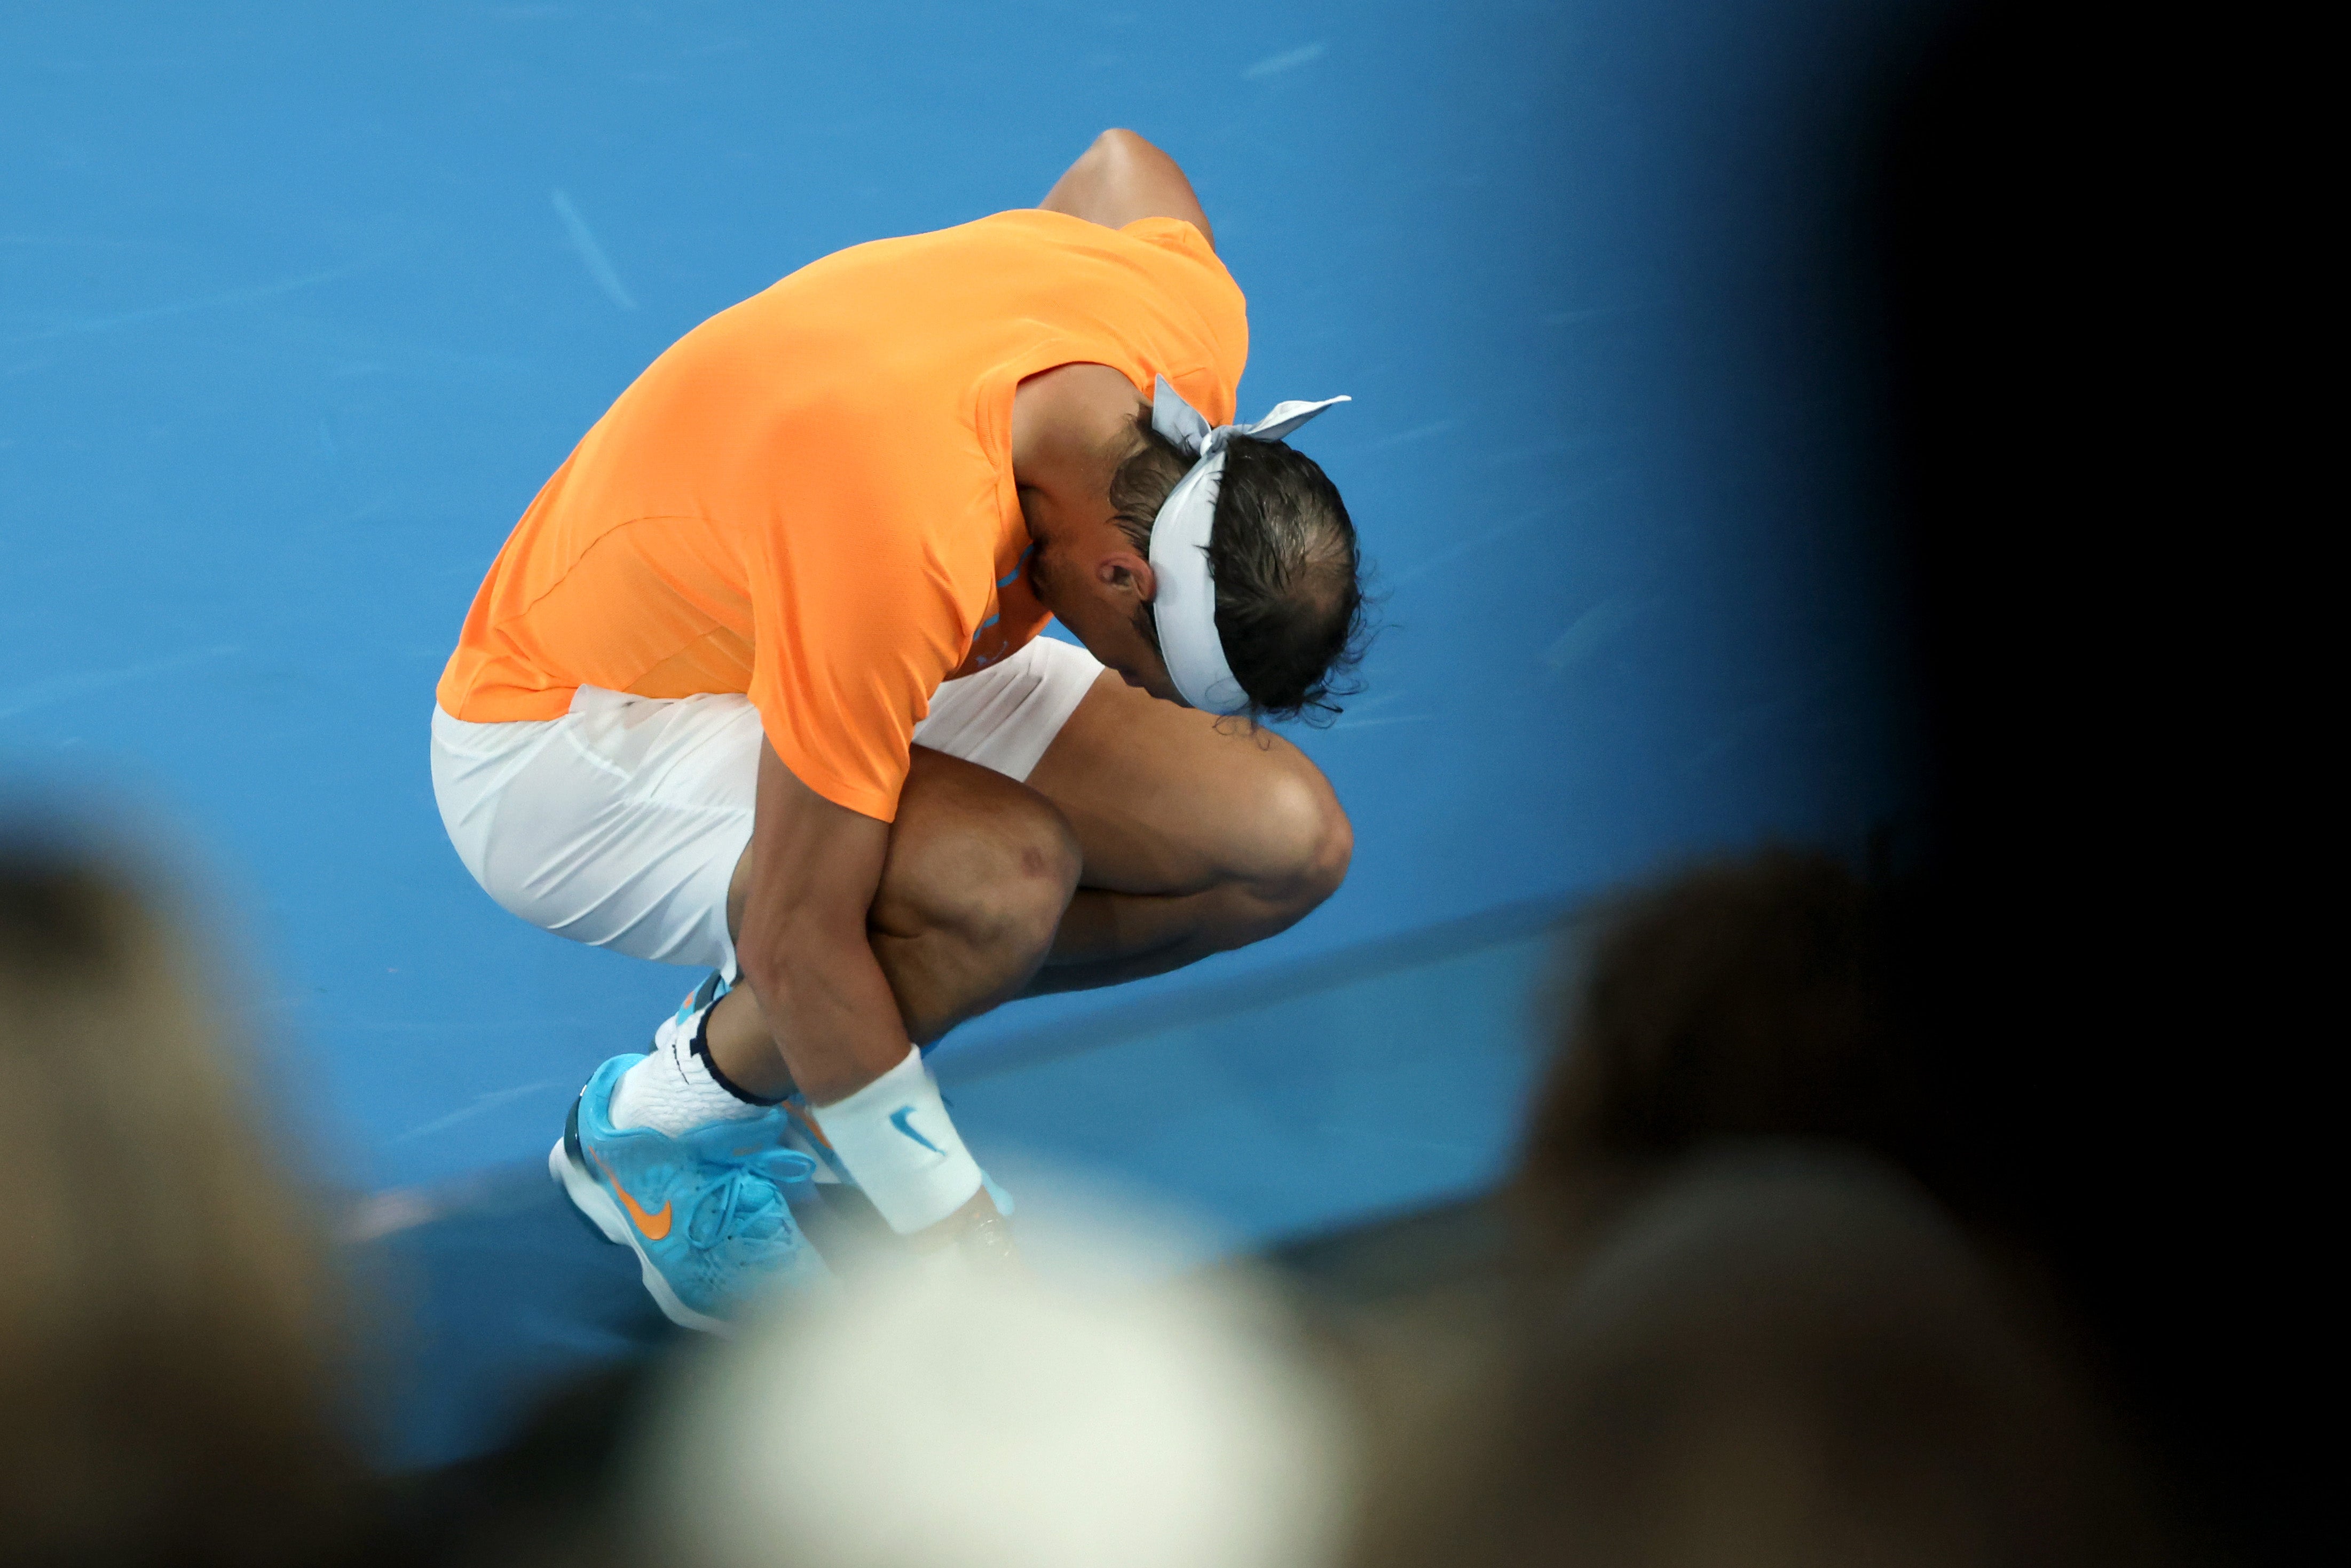 Nadal has not played since the Australian Open in January